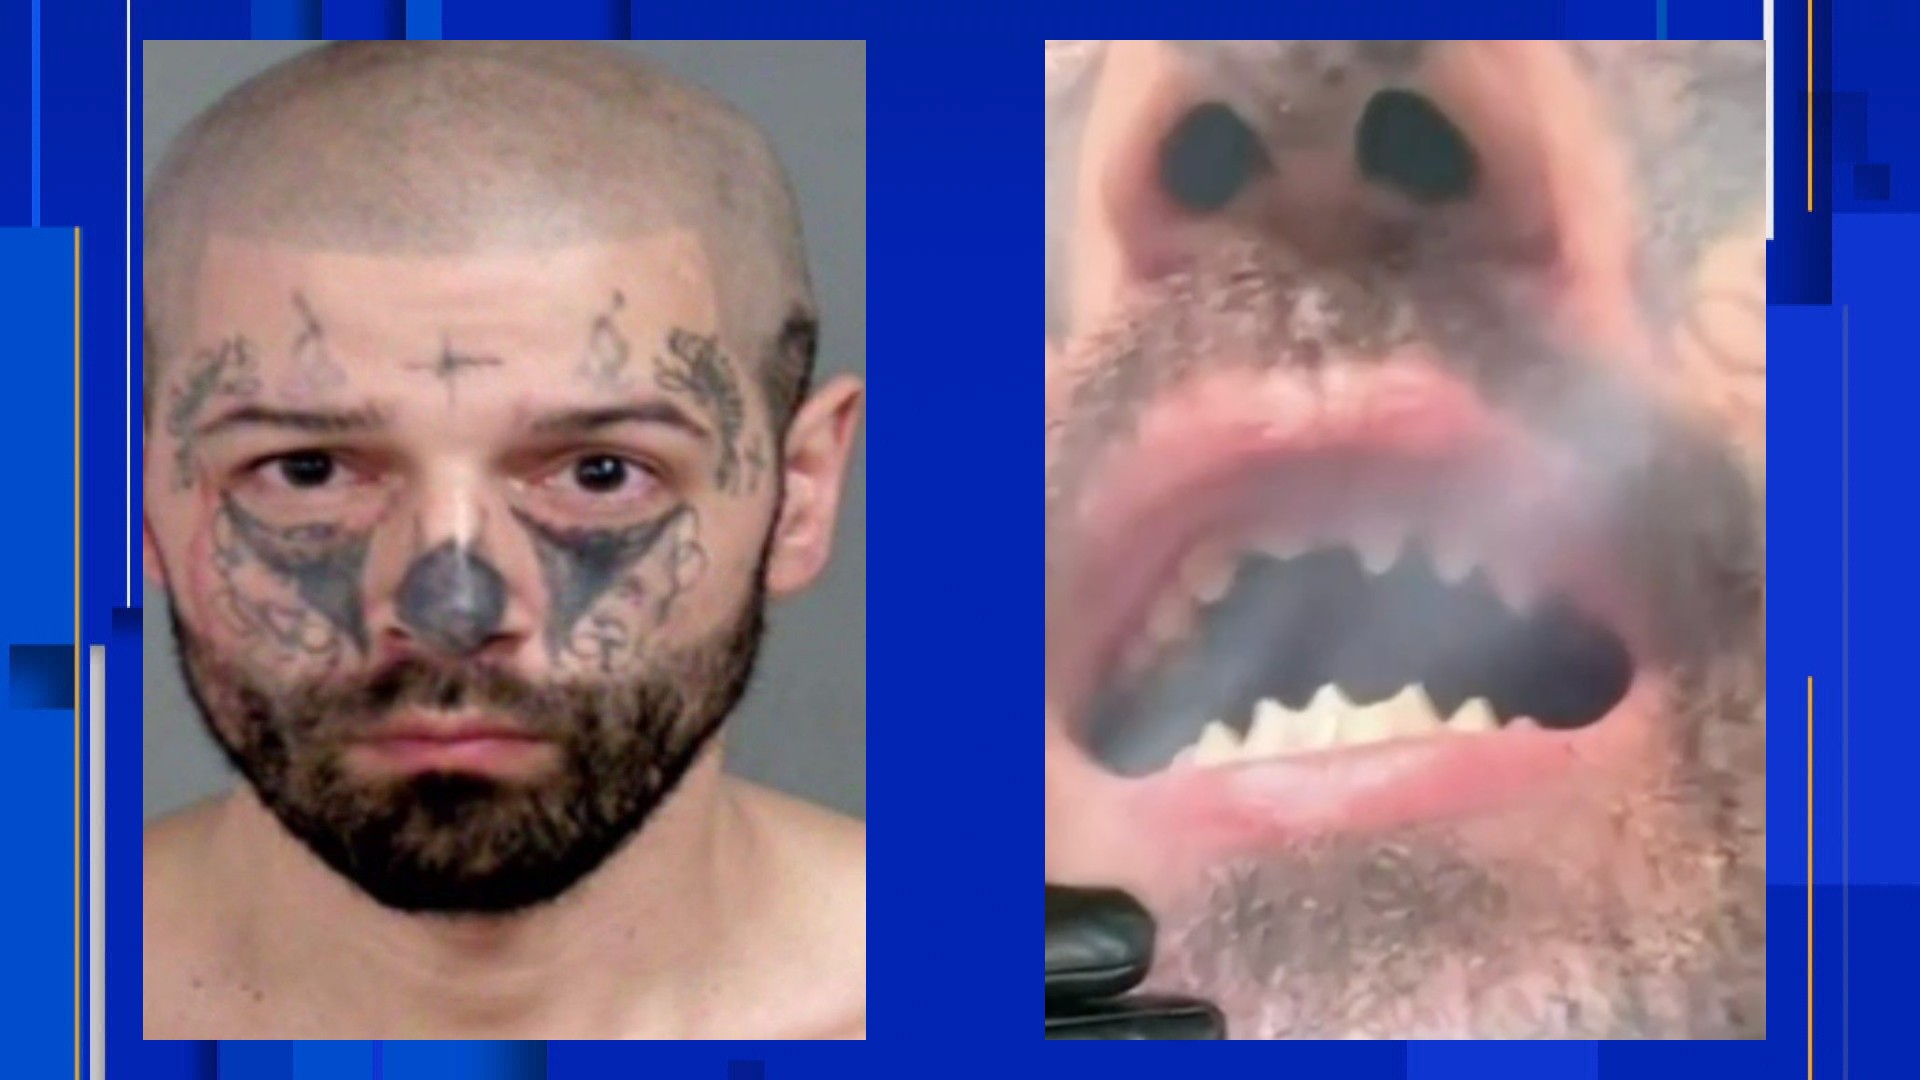 Michigan sex trafficker who filed teeth into points gets 20 more charges after 2nd victims story pic